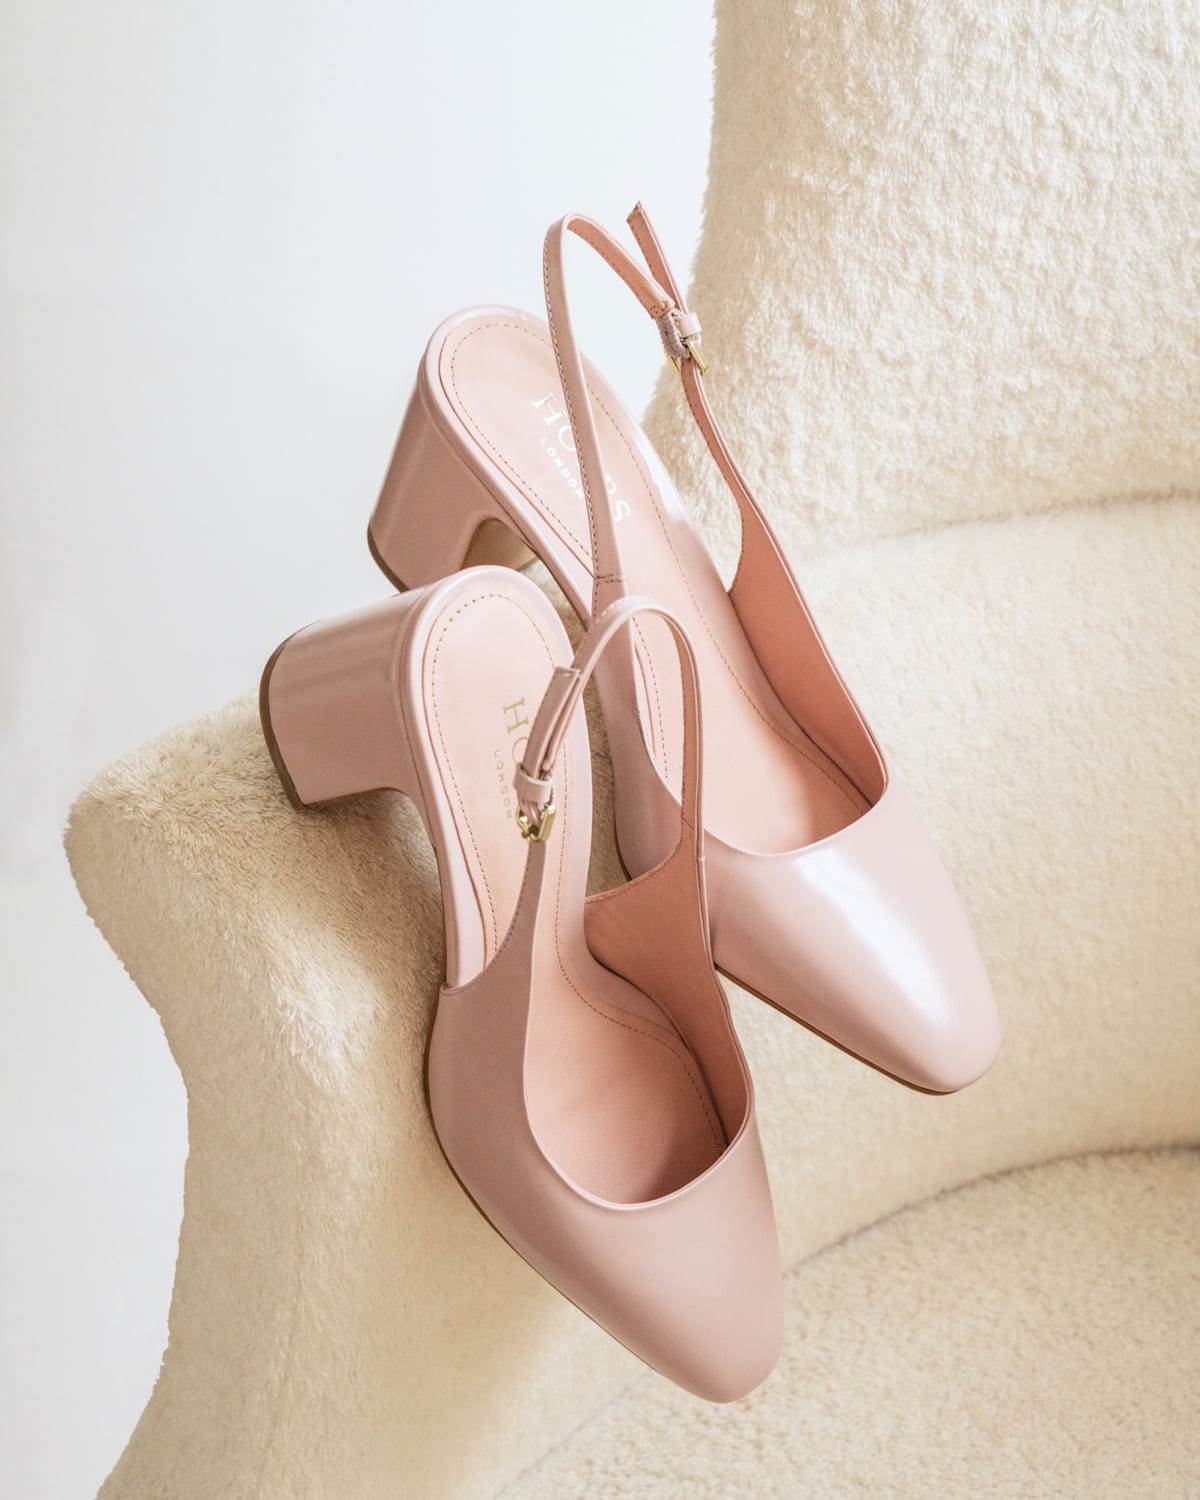 A pair of blush pink patent slingback shoes photographed on the arm of a chair.